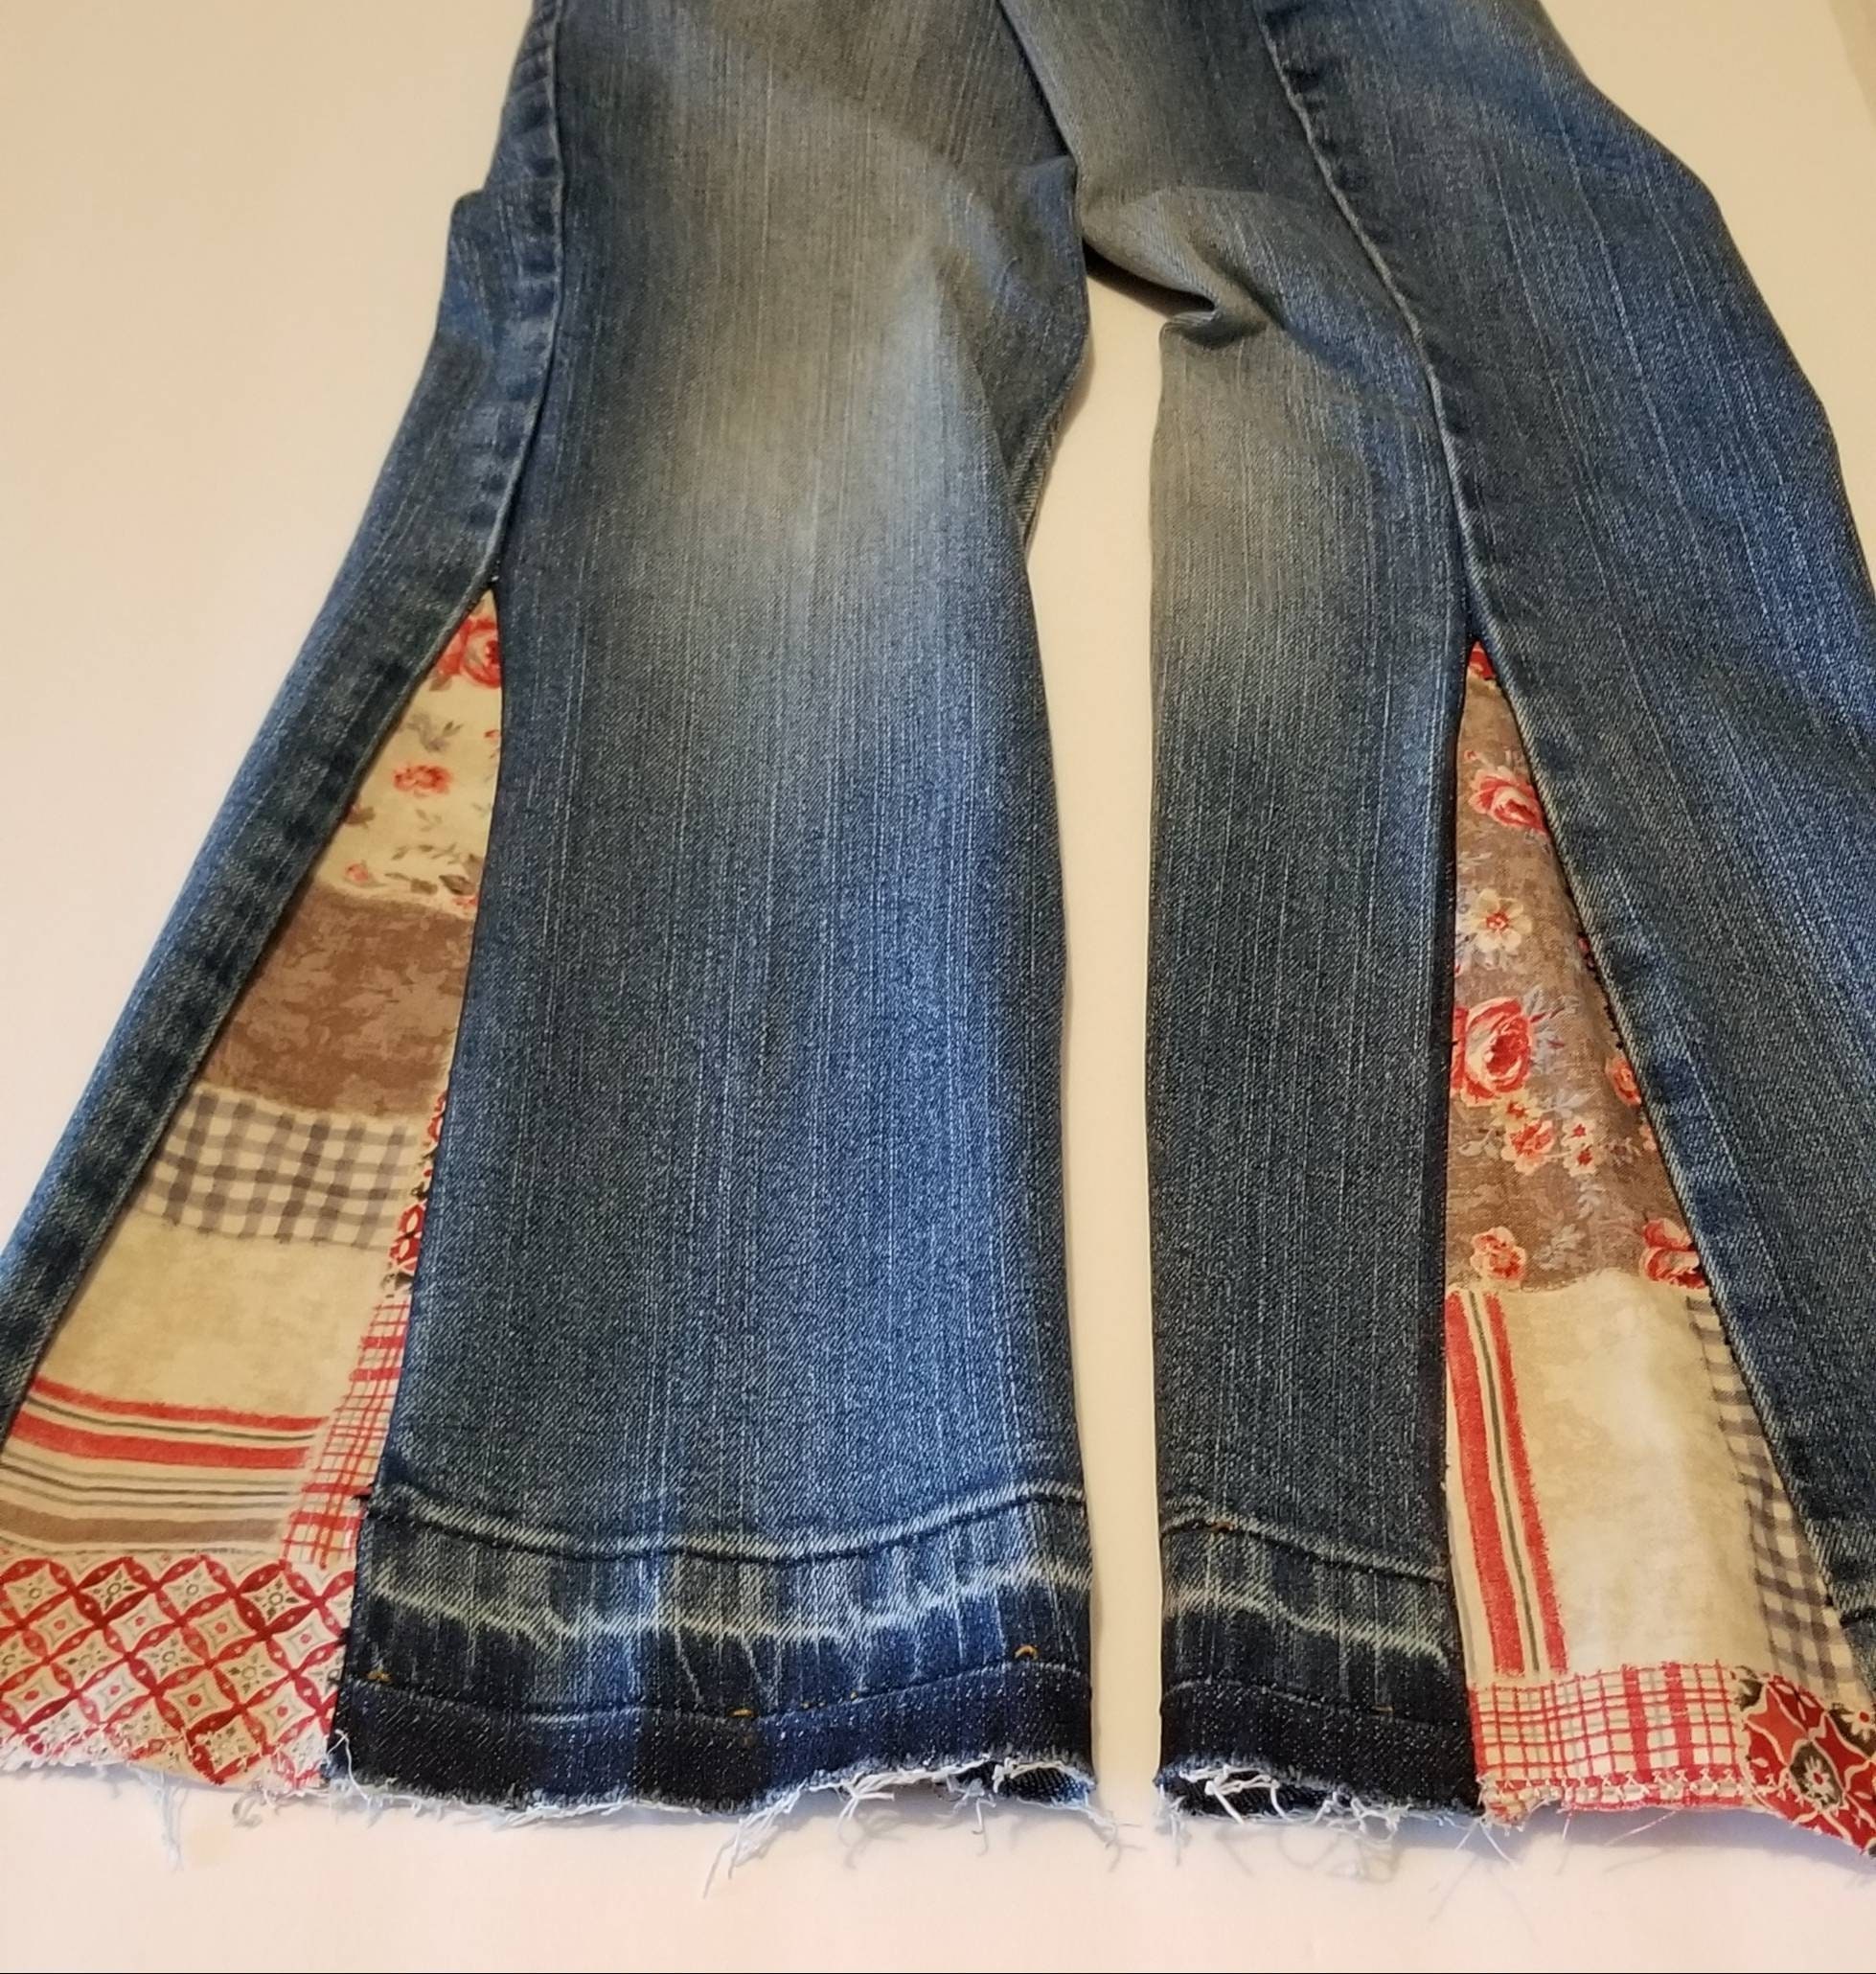 Buy Vintage Style Bell Bottom Jeans// Up-cycled Flared Leg Denim